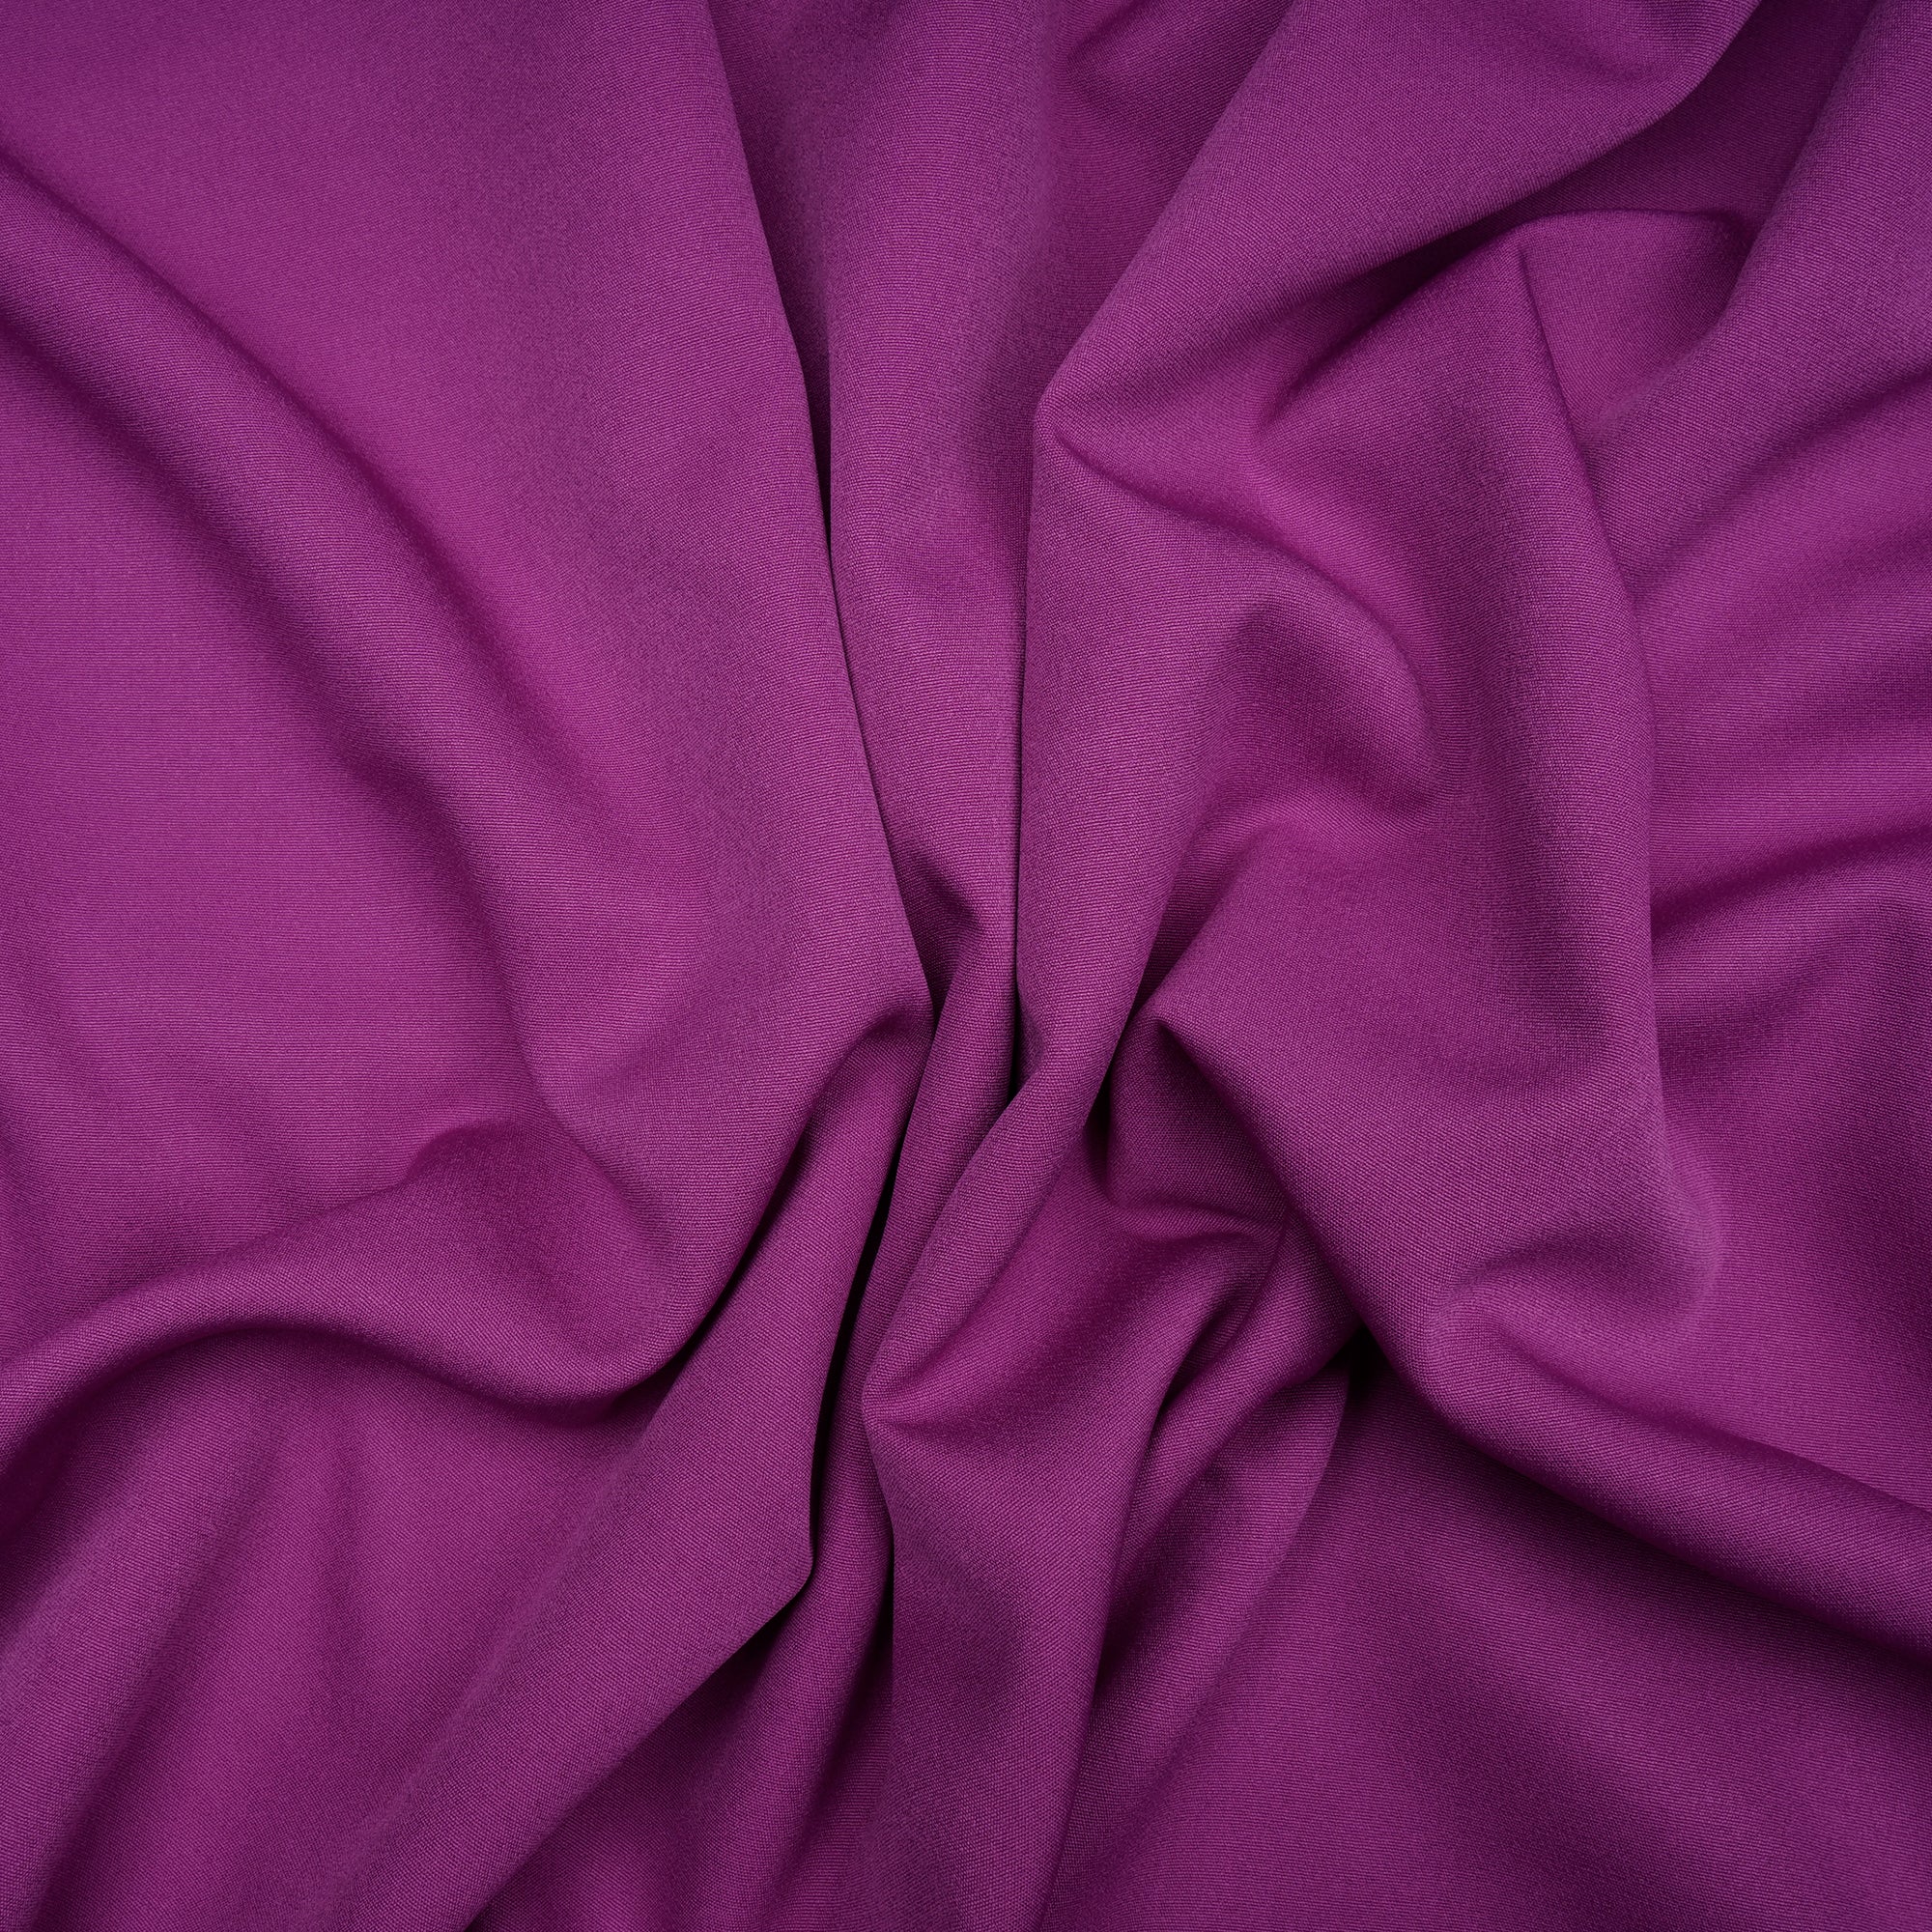 Hyacinth Voilet Solid Dyed Imported Banana Crepe Fabric (60" Width)